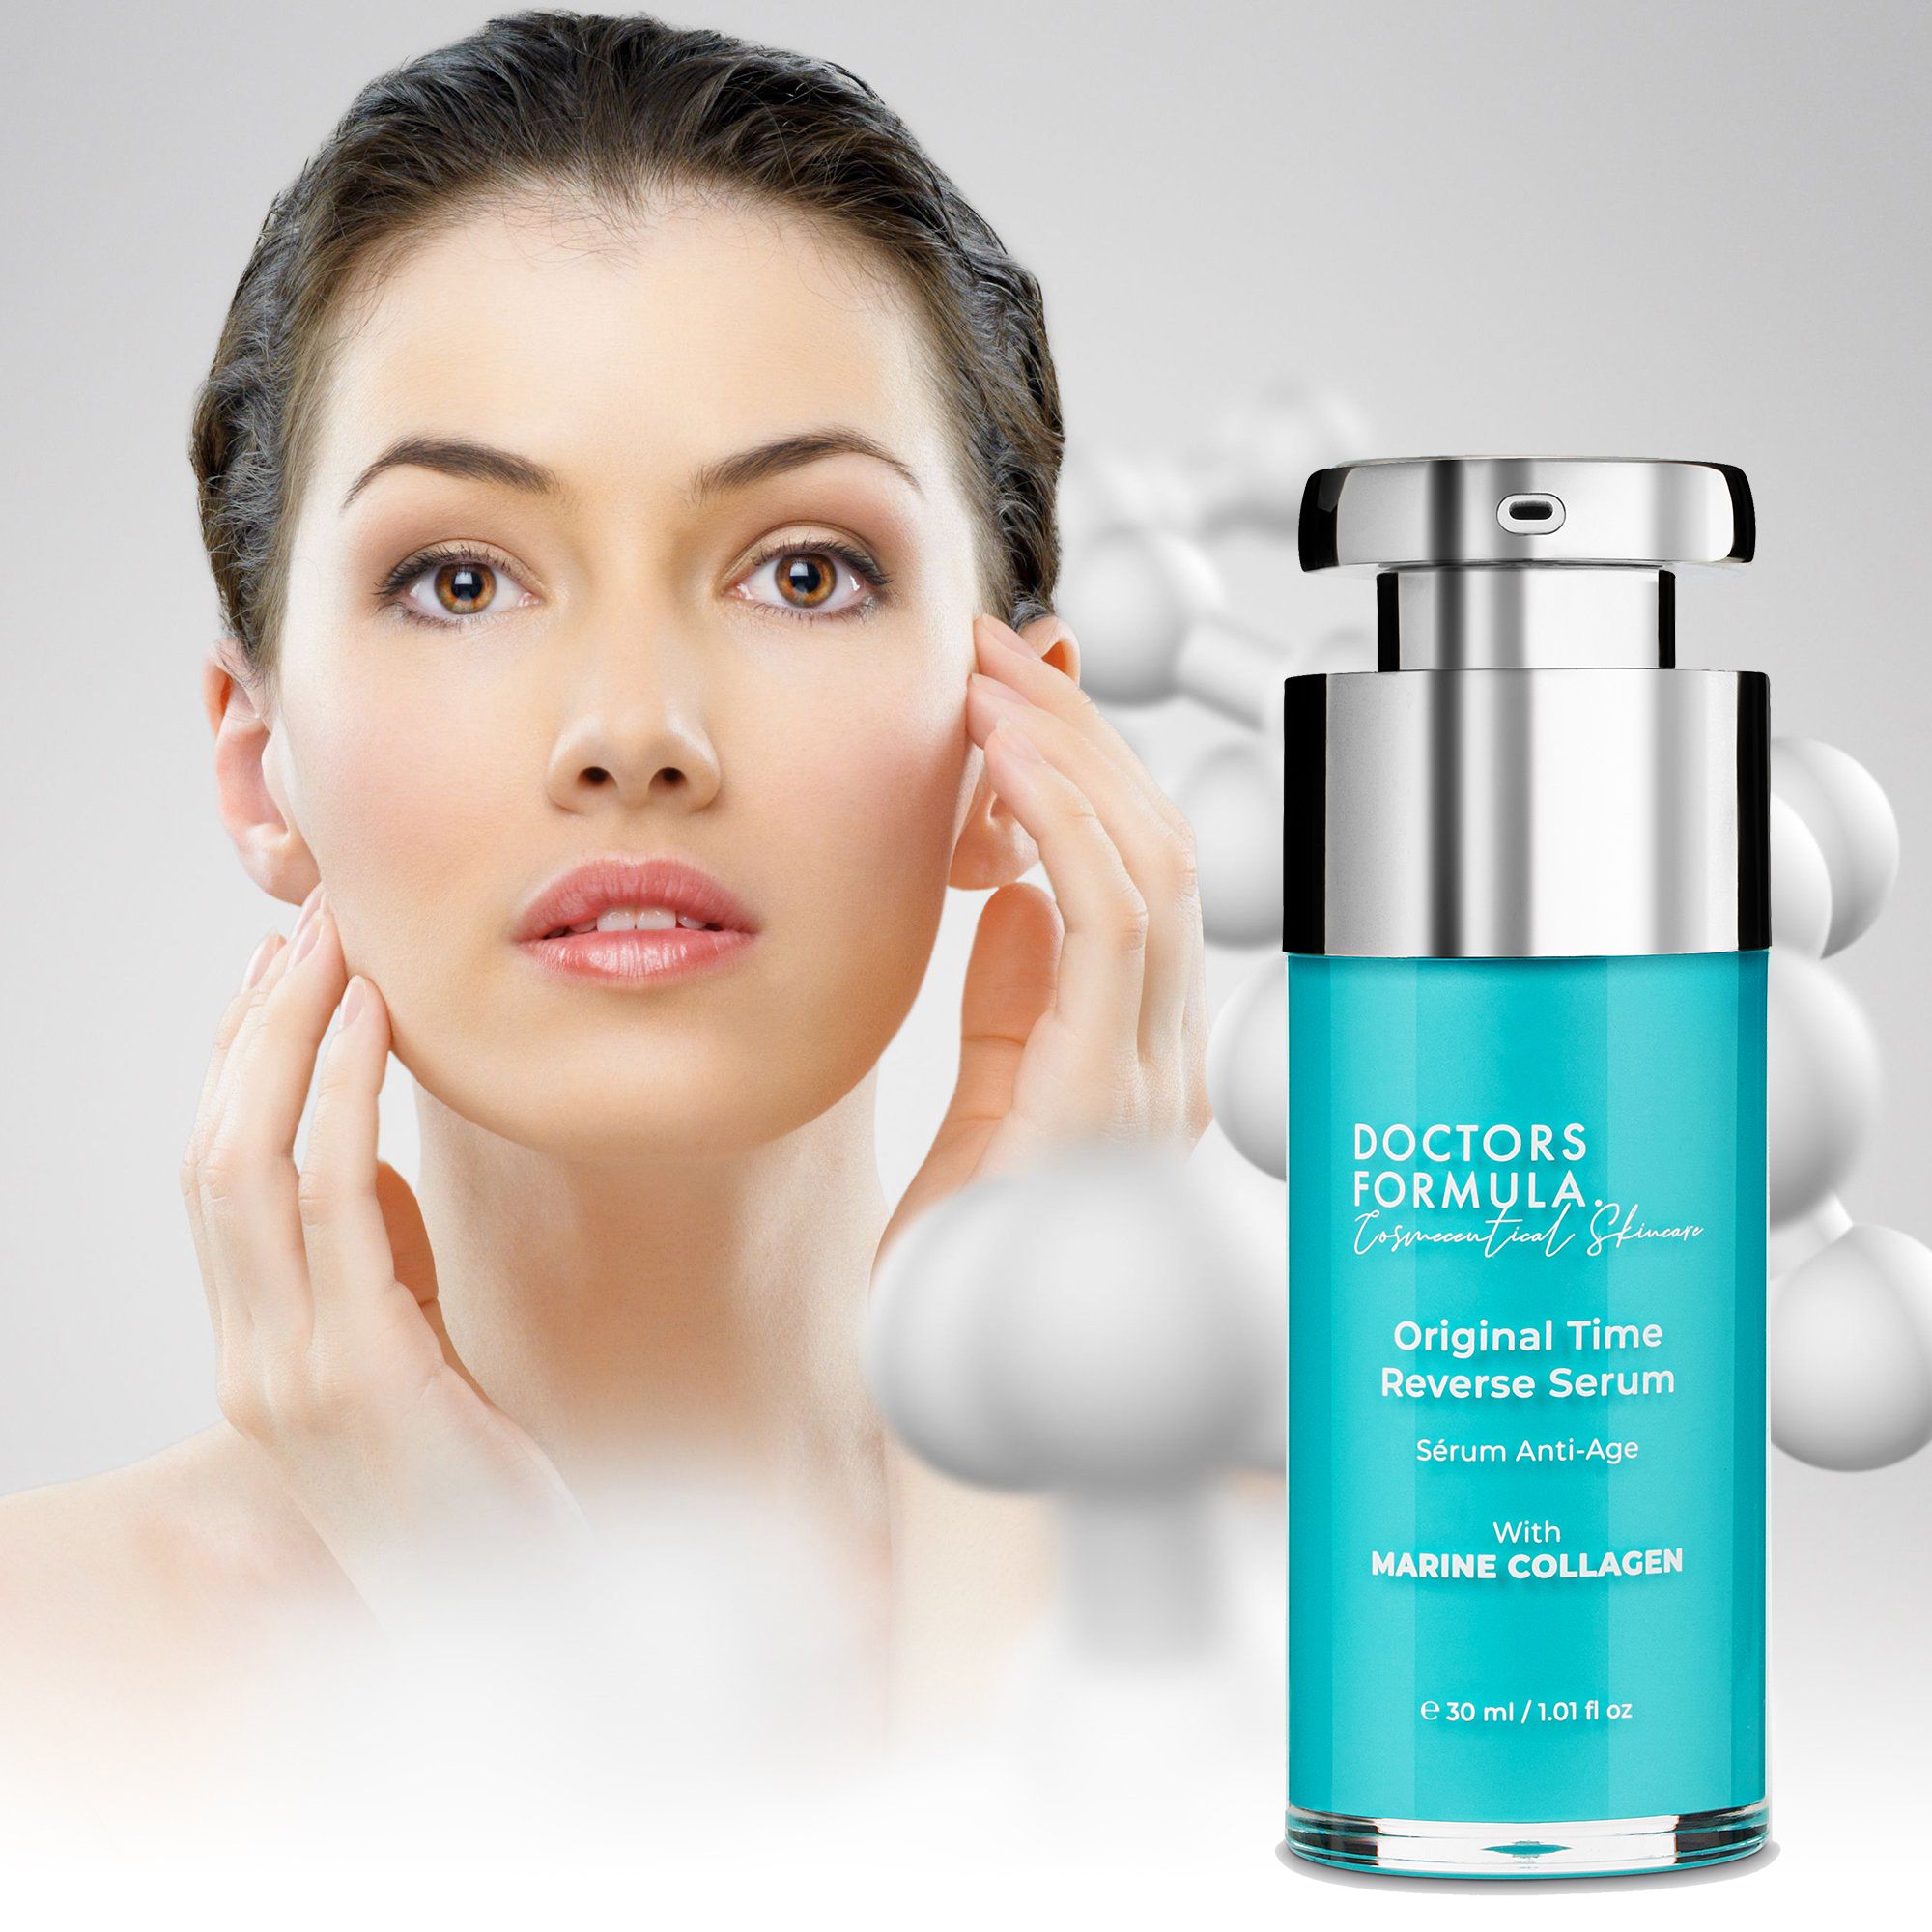 The signature Time Reverse Serum by Doctors Formula, encompasses powerful active ingredients for restructuring skin. 
Specifically formulated for high definition hydration, dramatic fresh-faced plumpness and glow boosting vitality.

Key Ingredients:
- Marine collagen amino acids intensely hydrate, provide super-enriched suppleness and boost the building blocks which maintain the skin.
- Soluble collagen infuses with natural moisture into the skin, defining texture for a more radiant, youthful appearance.
- Illuminate and revitalise with Algae extract. Watch skin vitality return.

Usage:
Apply 1-2 pumps morning and evening to face, neck and decollete, after cleansing and prior to applying moisturiser.

100% Cruelty Free